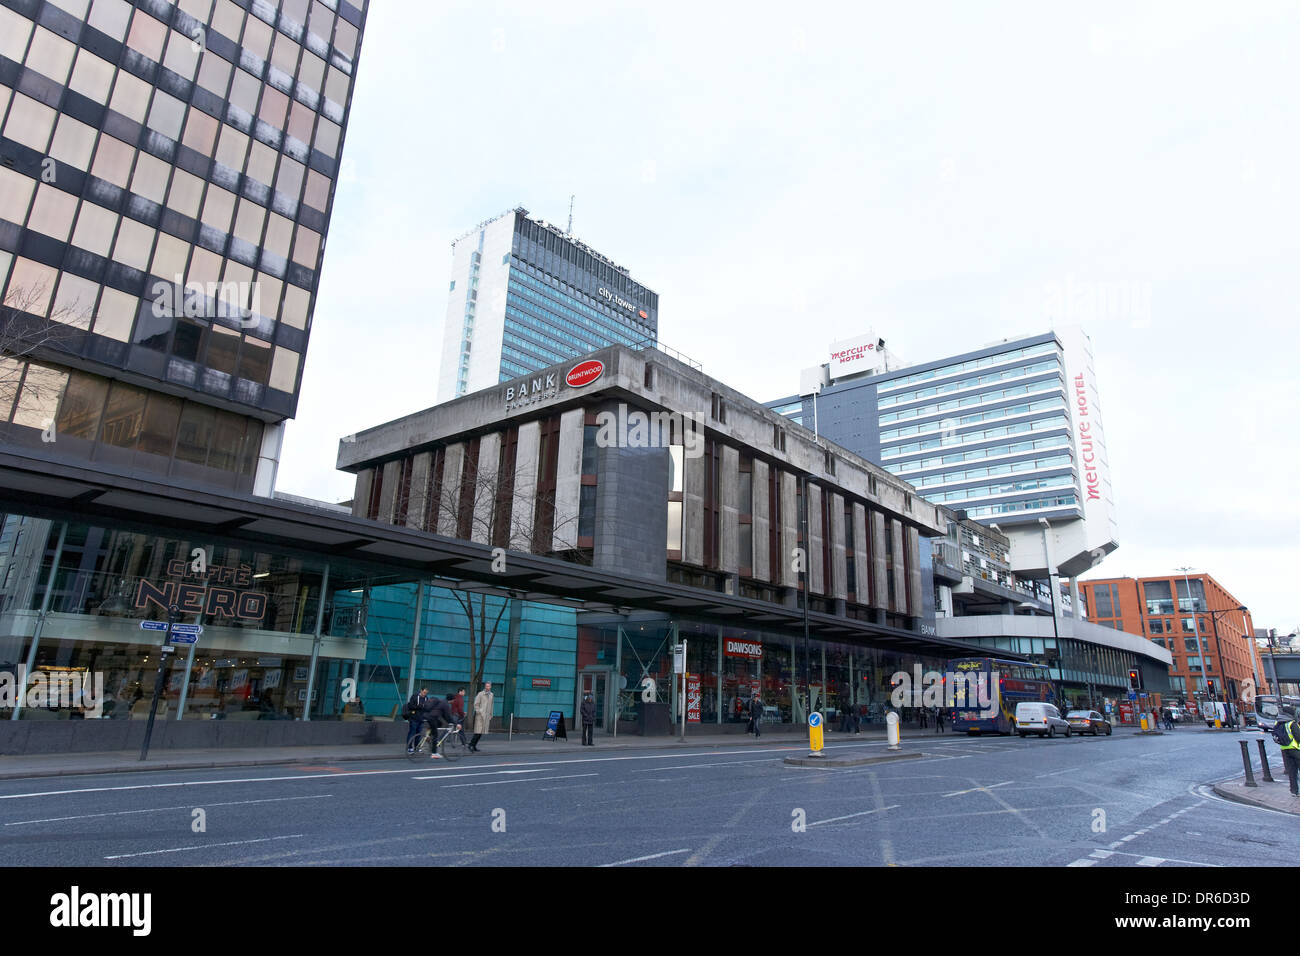 View into Portland Street with City Tower and Mercure hotel in Manchester UK Stock Photo